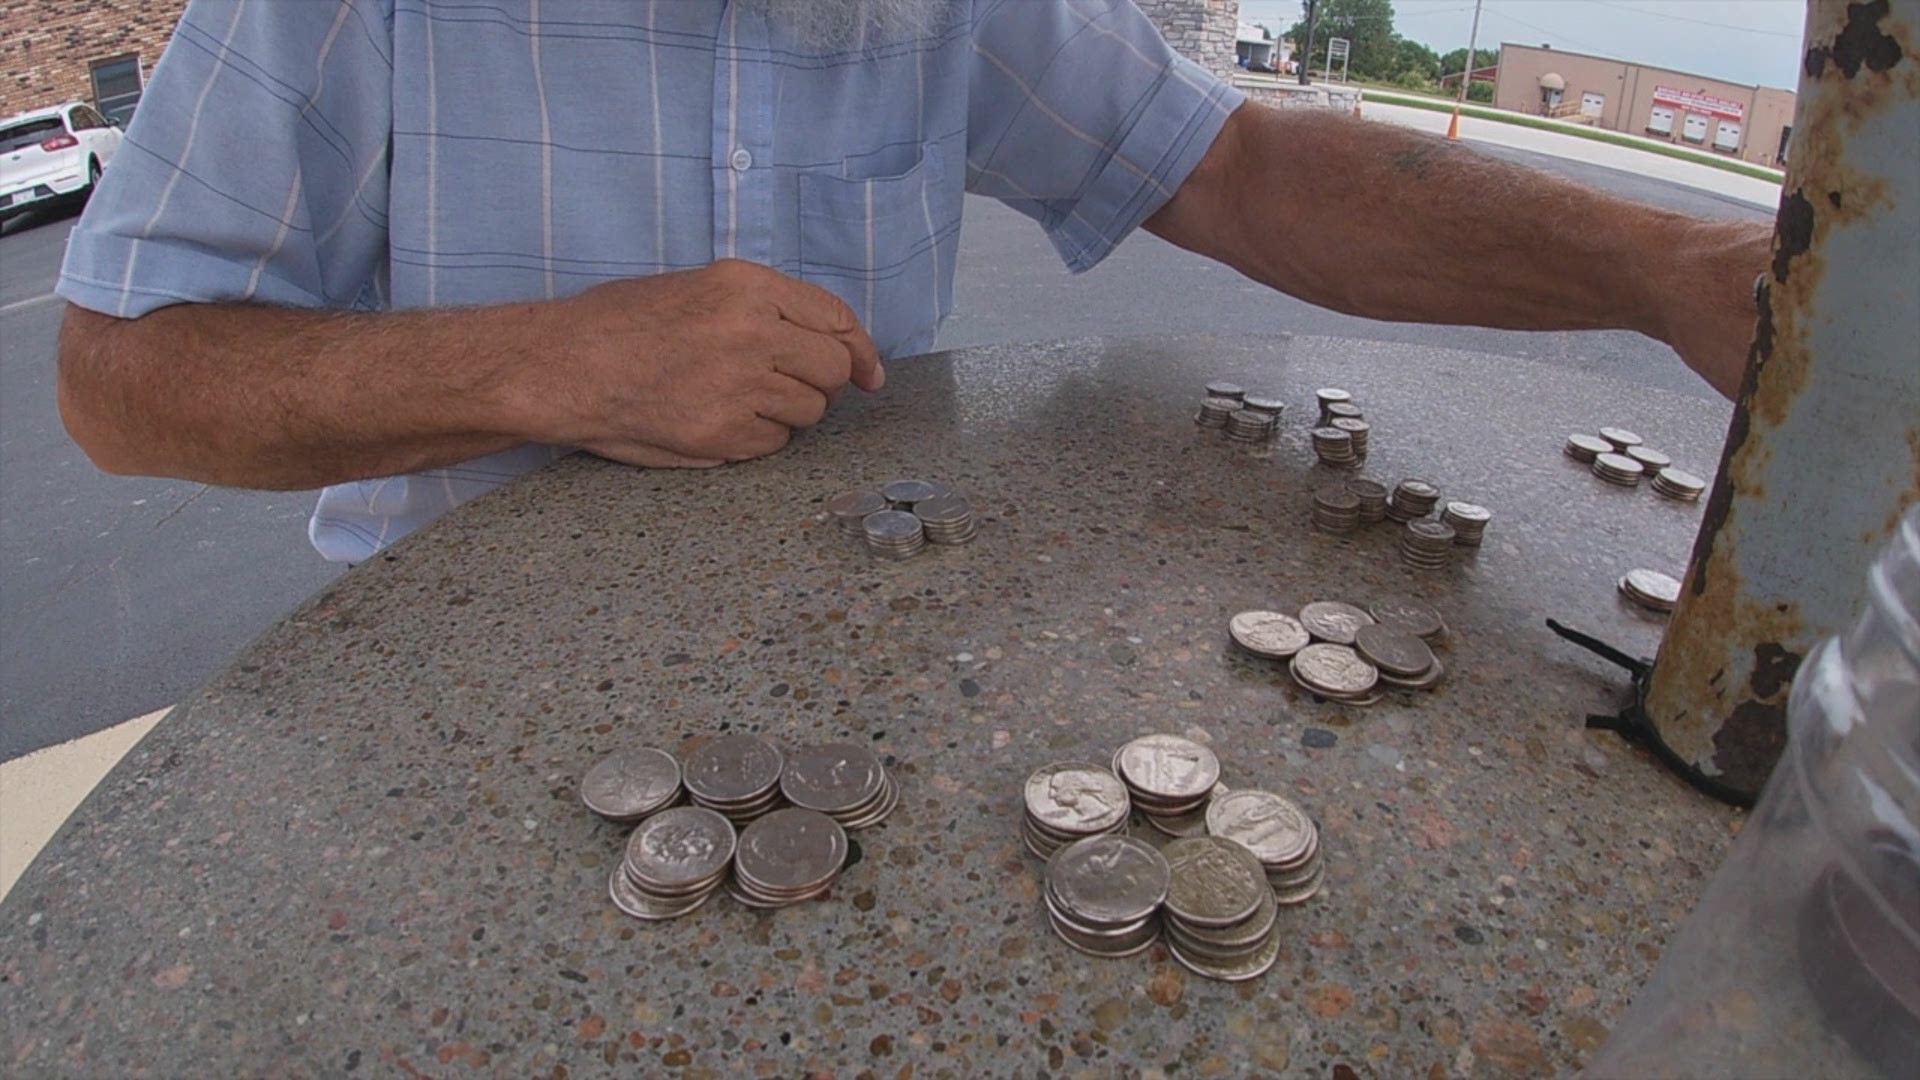 Owner Joe Ende said after leaving the bank empty handed, he decided to hold a "Pay Your Age" ice cream promotion to replenish his business' supply of coins.